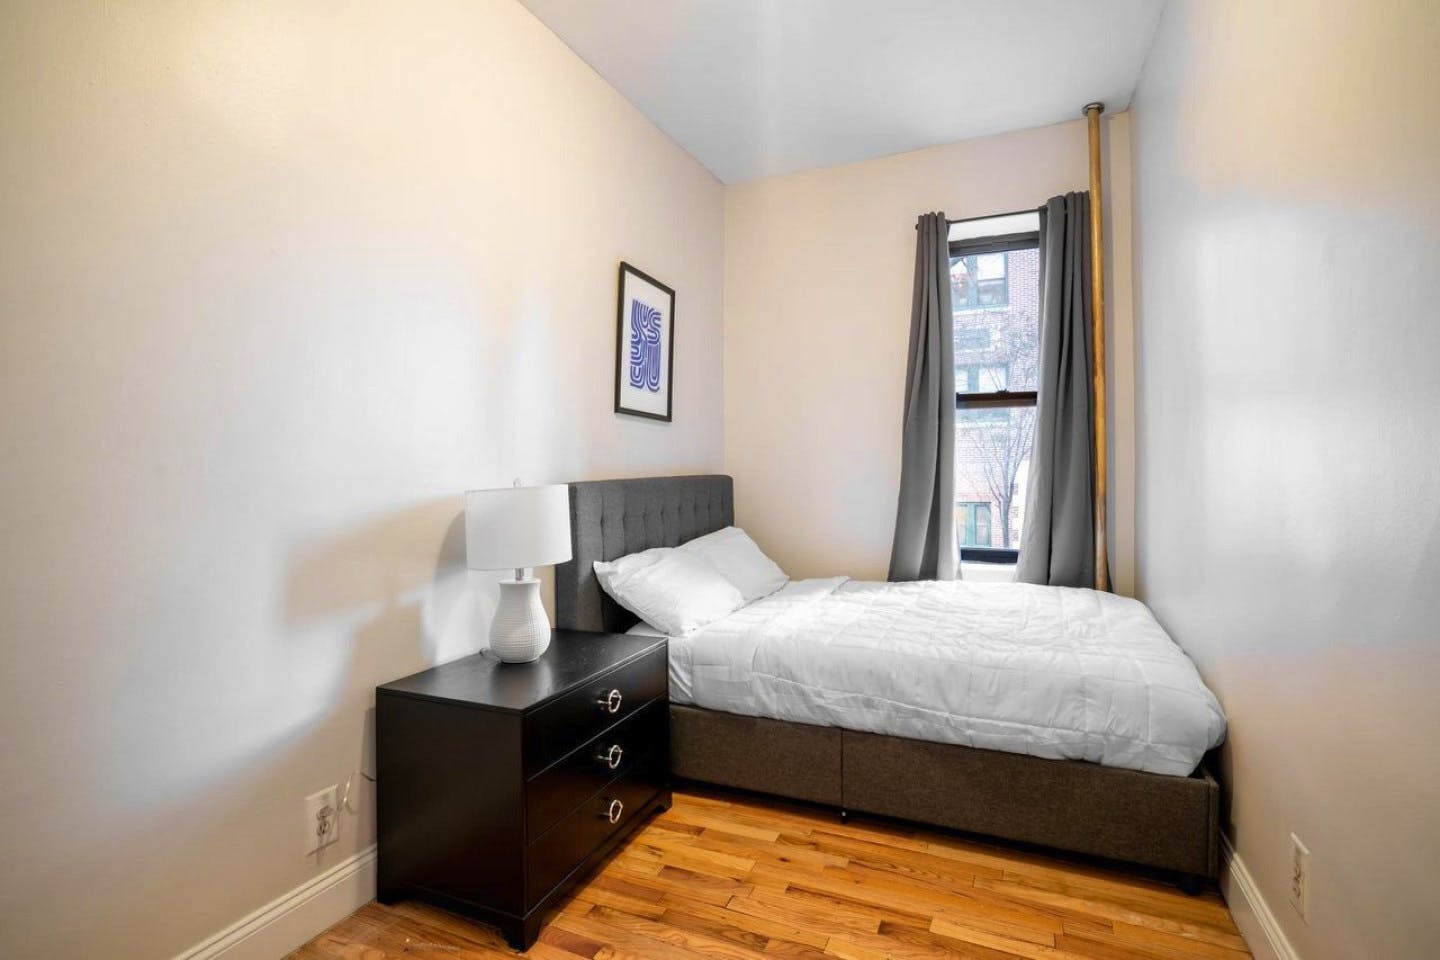 Outstanding Bright House close to Marcus Garvey Park